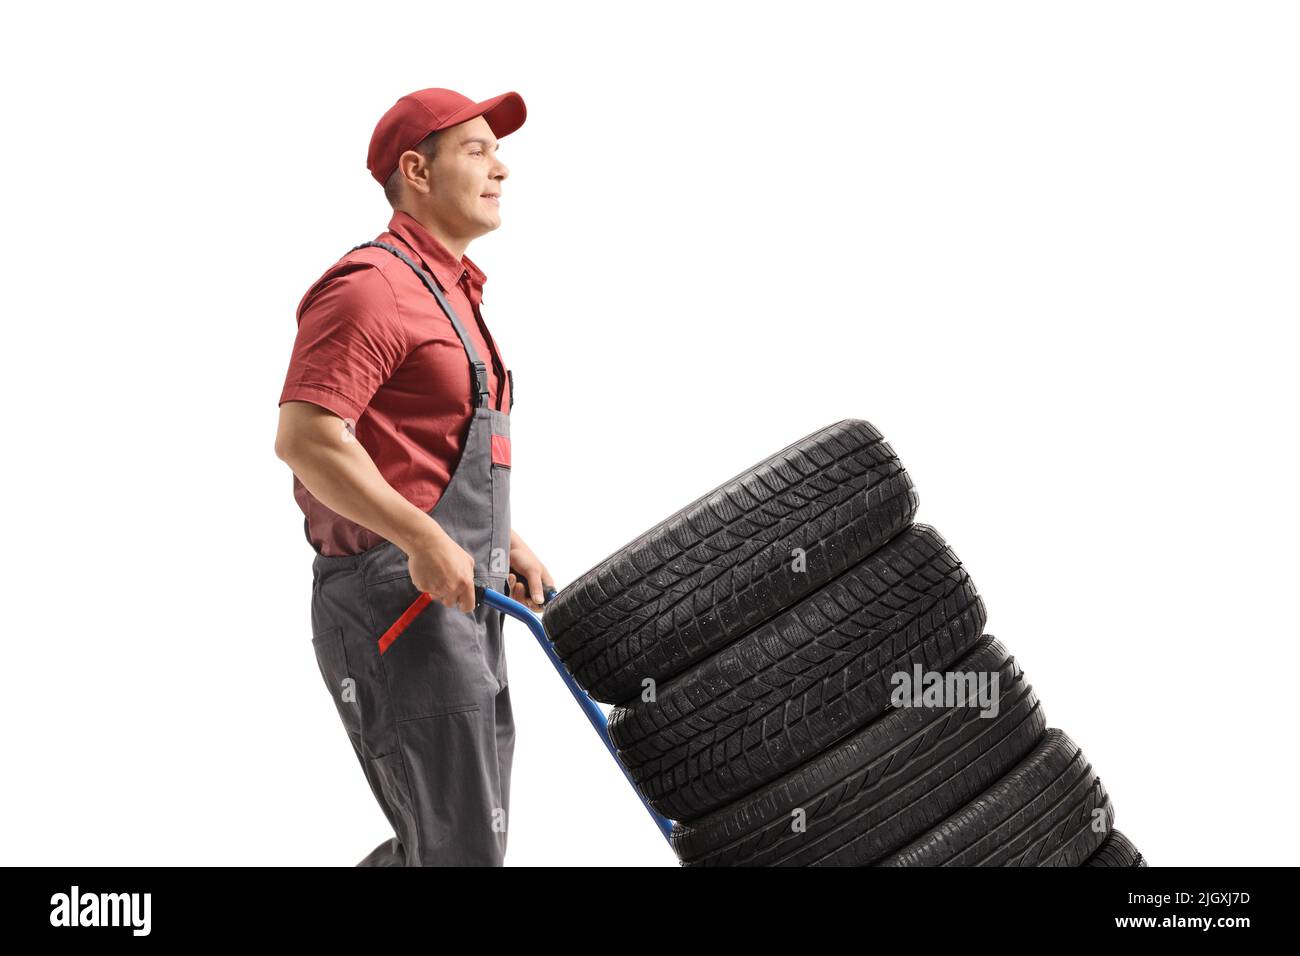 Man pushing car tires with a hand truck isolated on white background Stock Photo